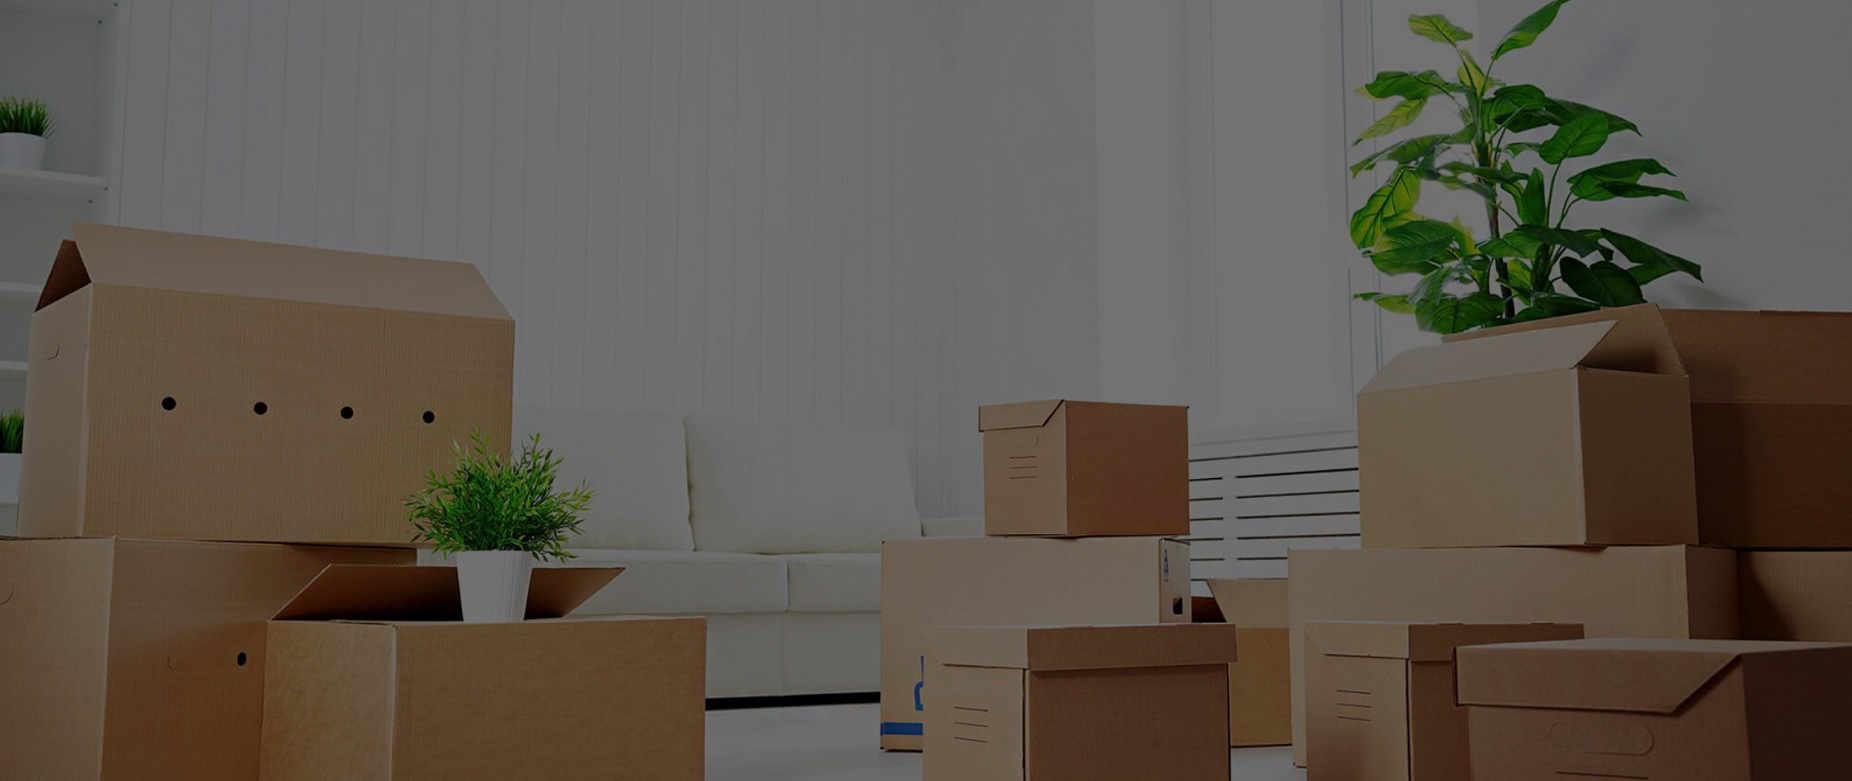 Udaipur Packers and Movers